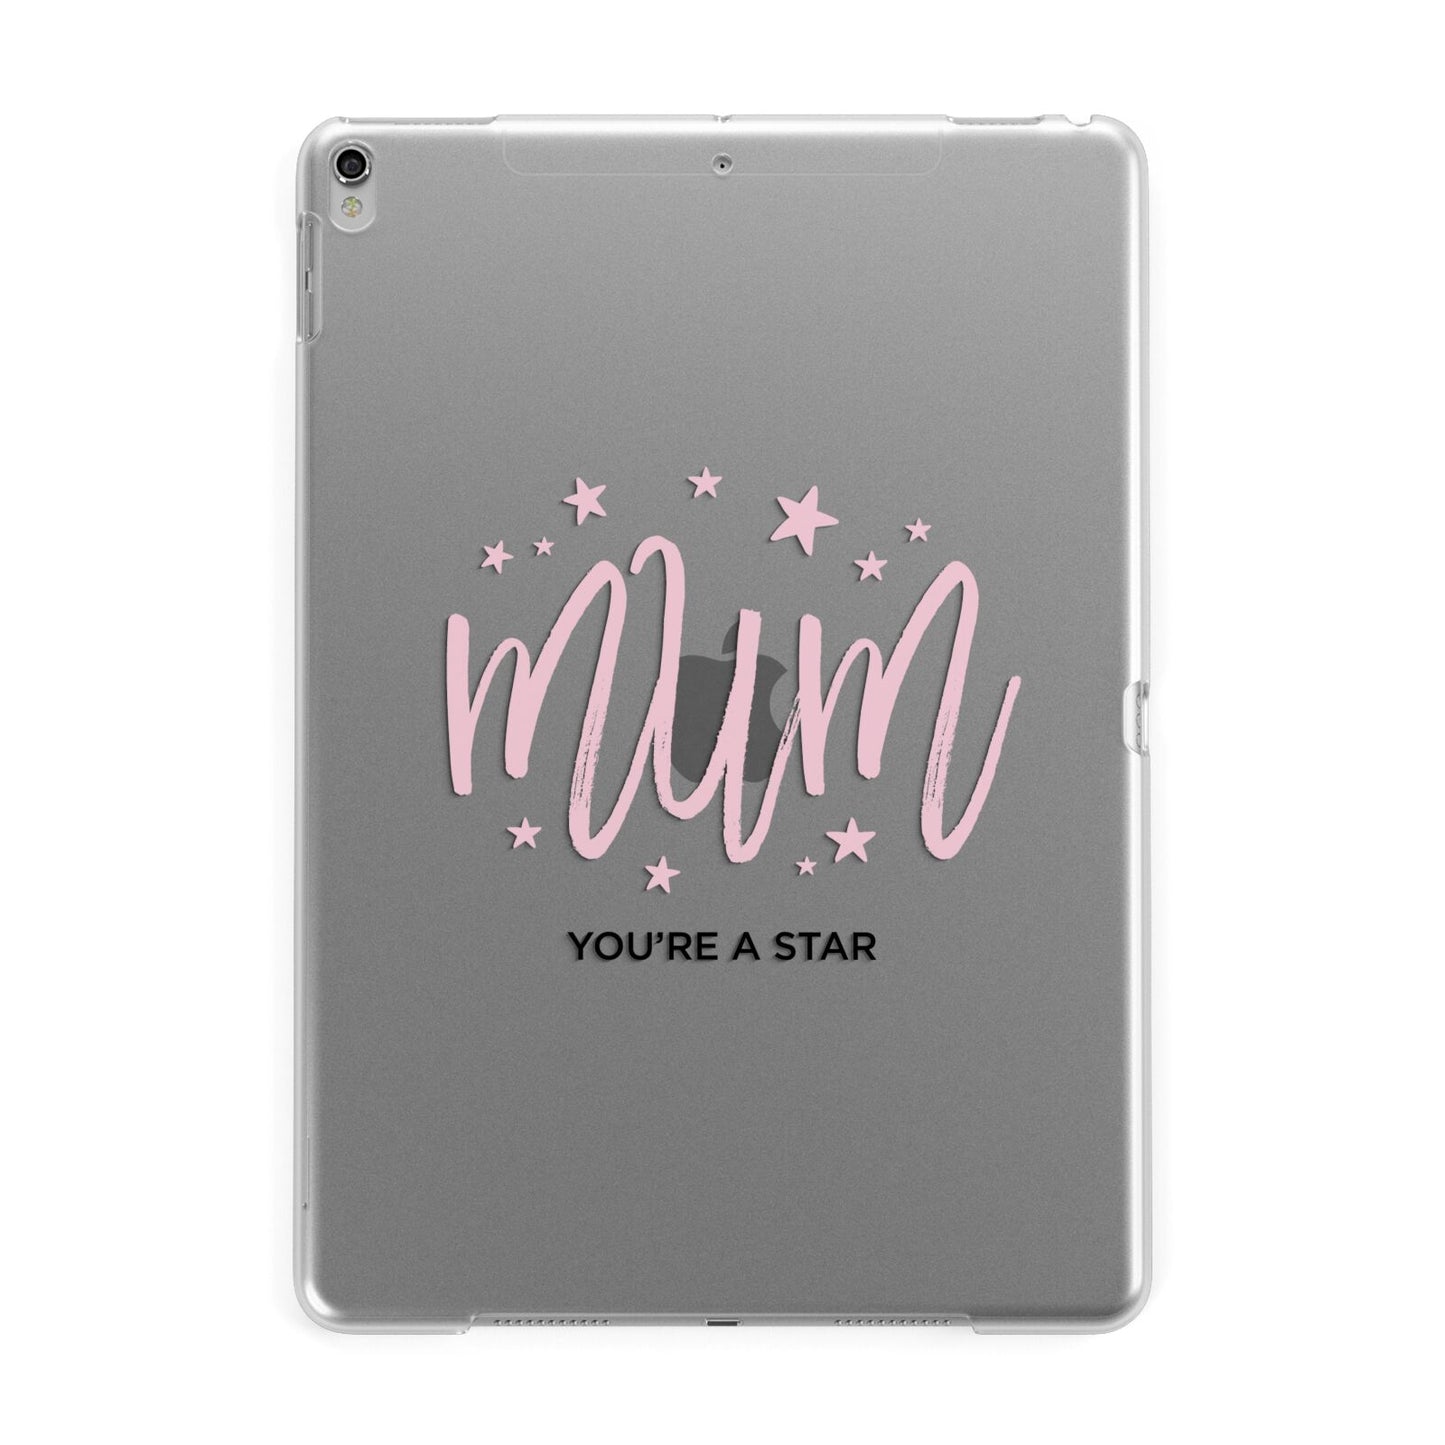 Mum Youre a Star Apple iPad Silver Case